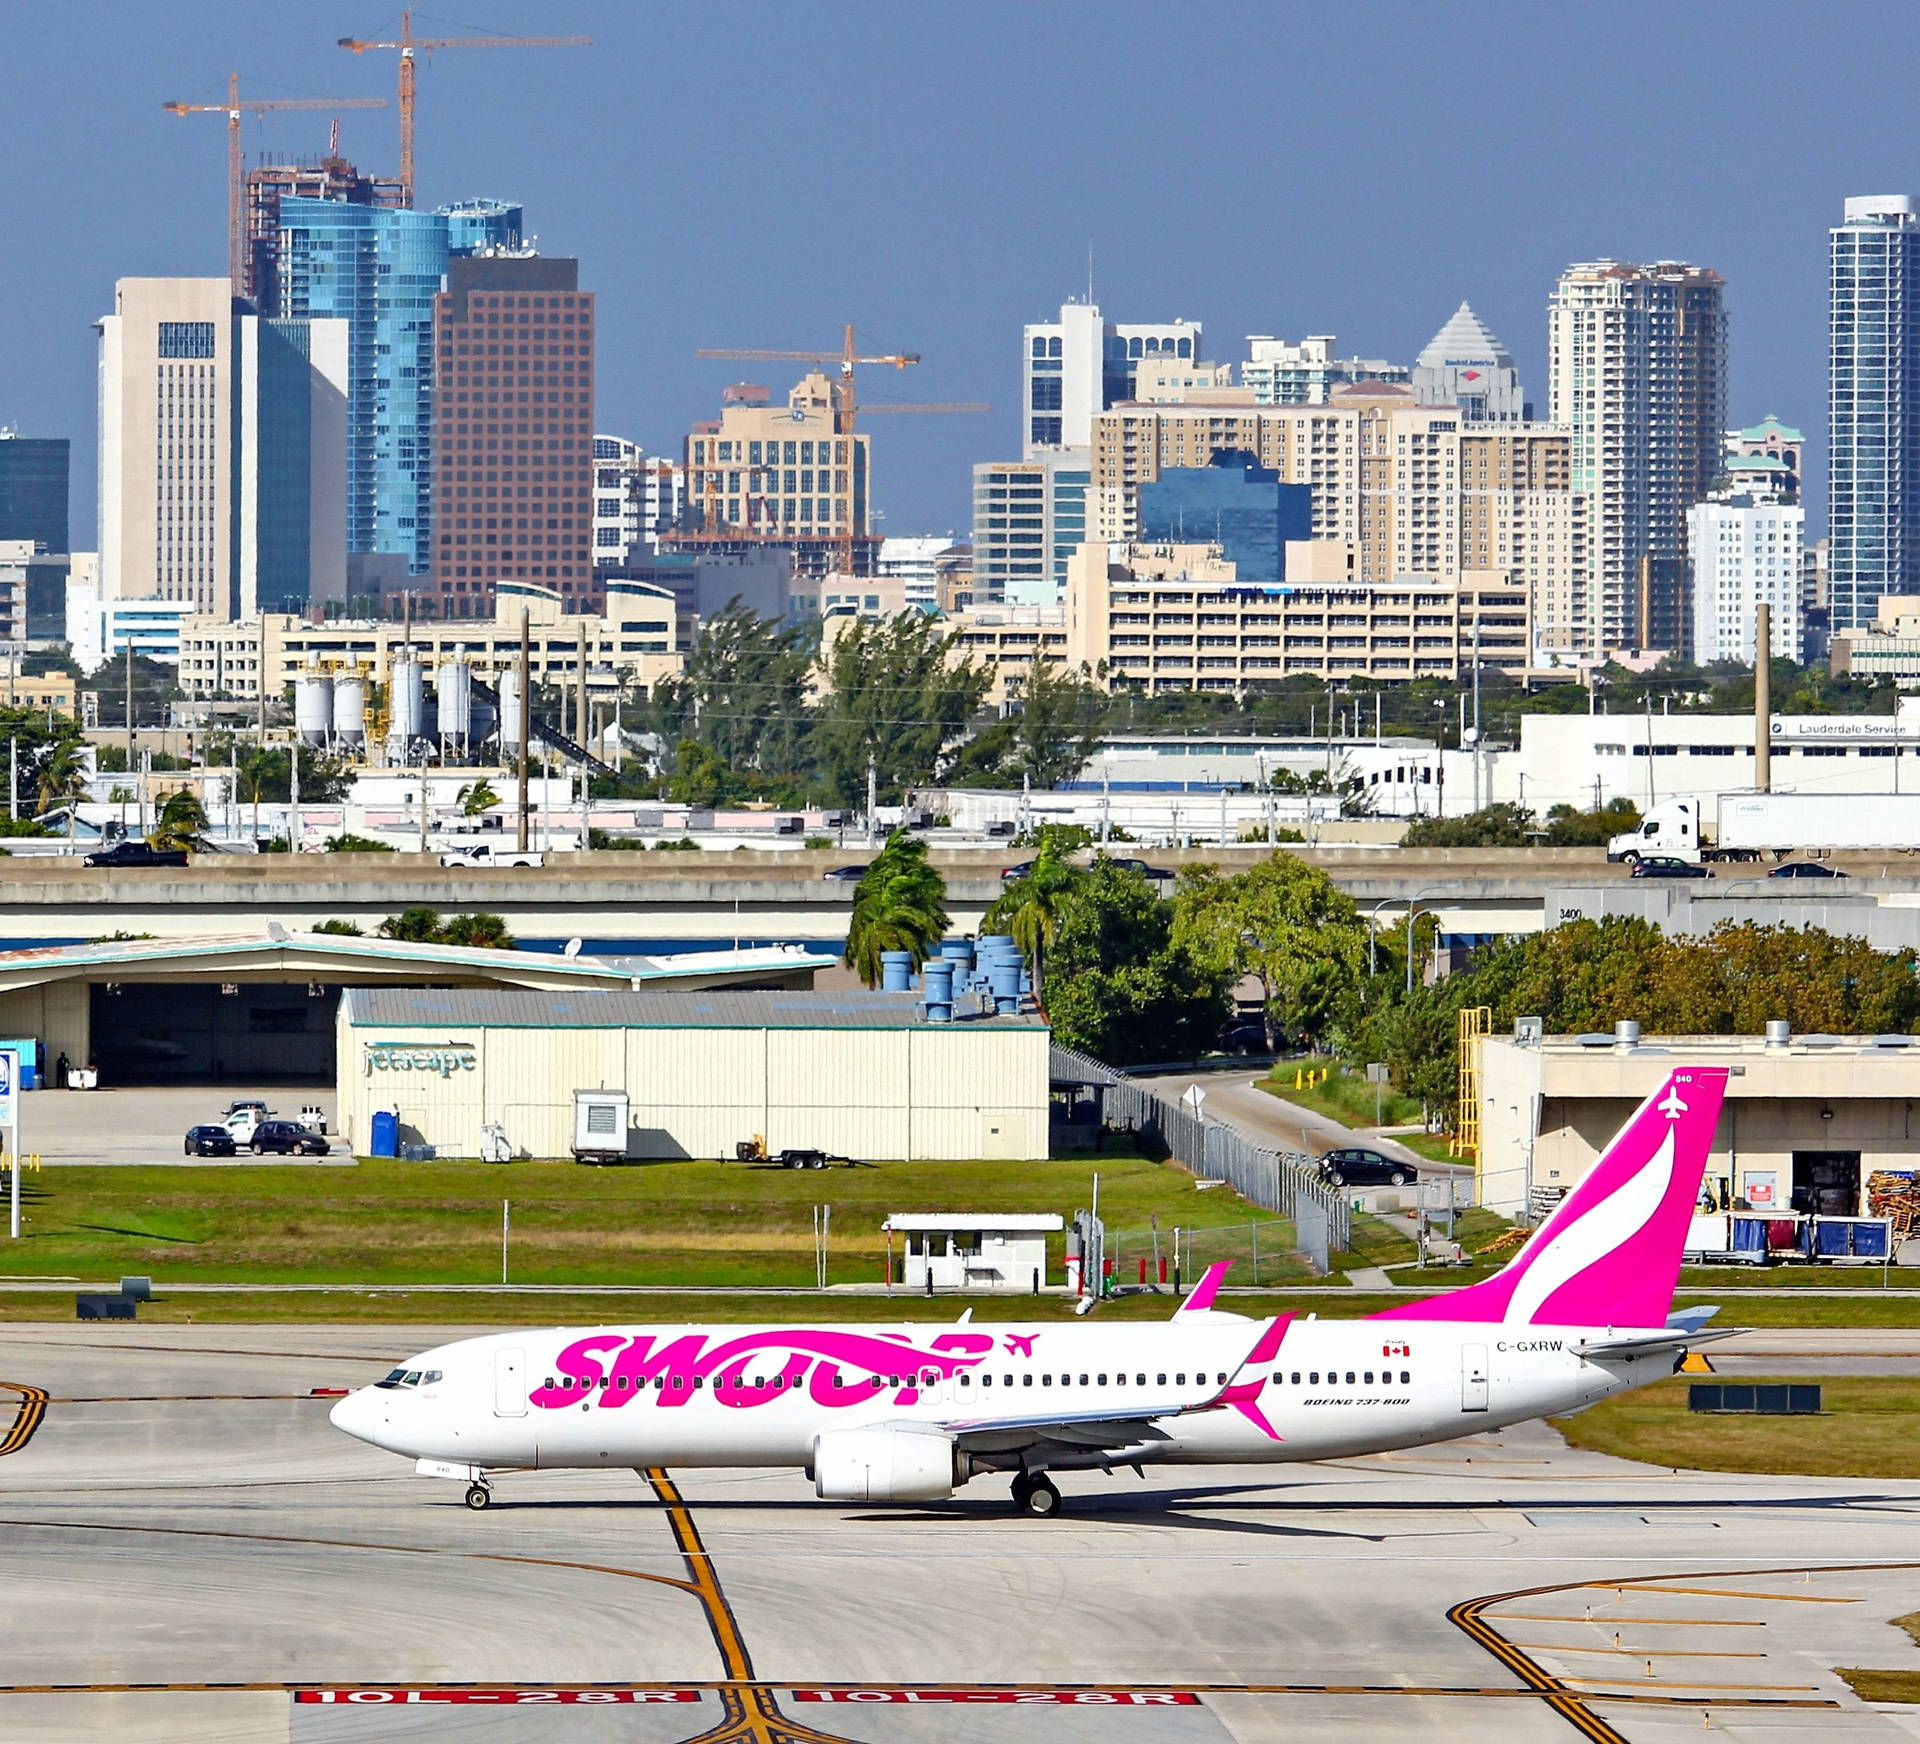 Swoop Airlines Plane With A City View Wallpaper